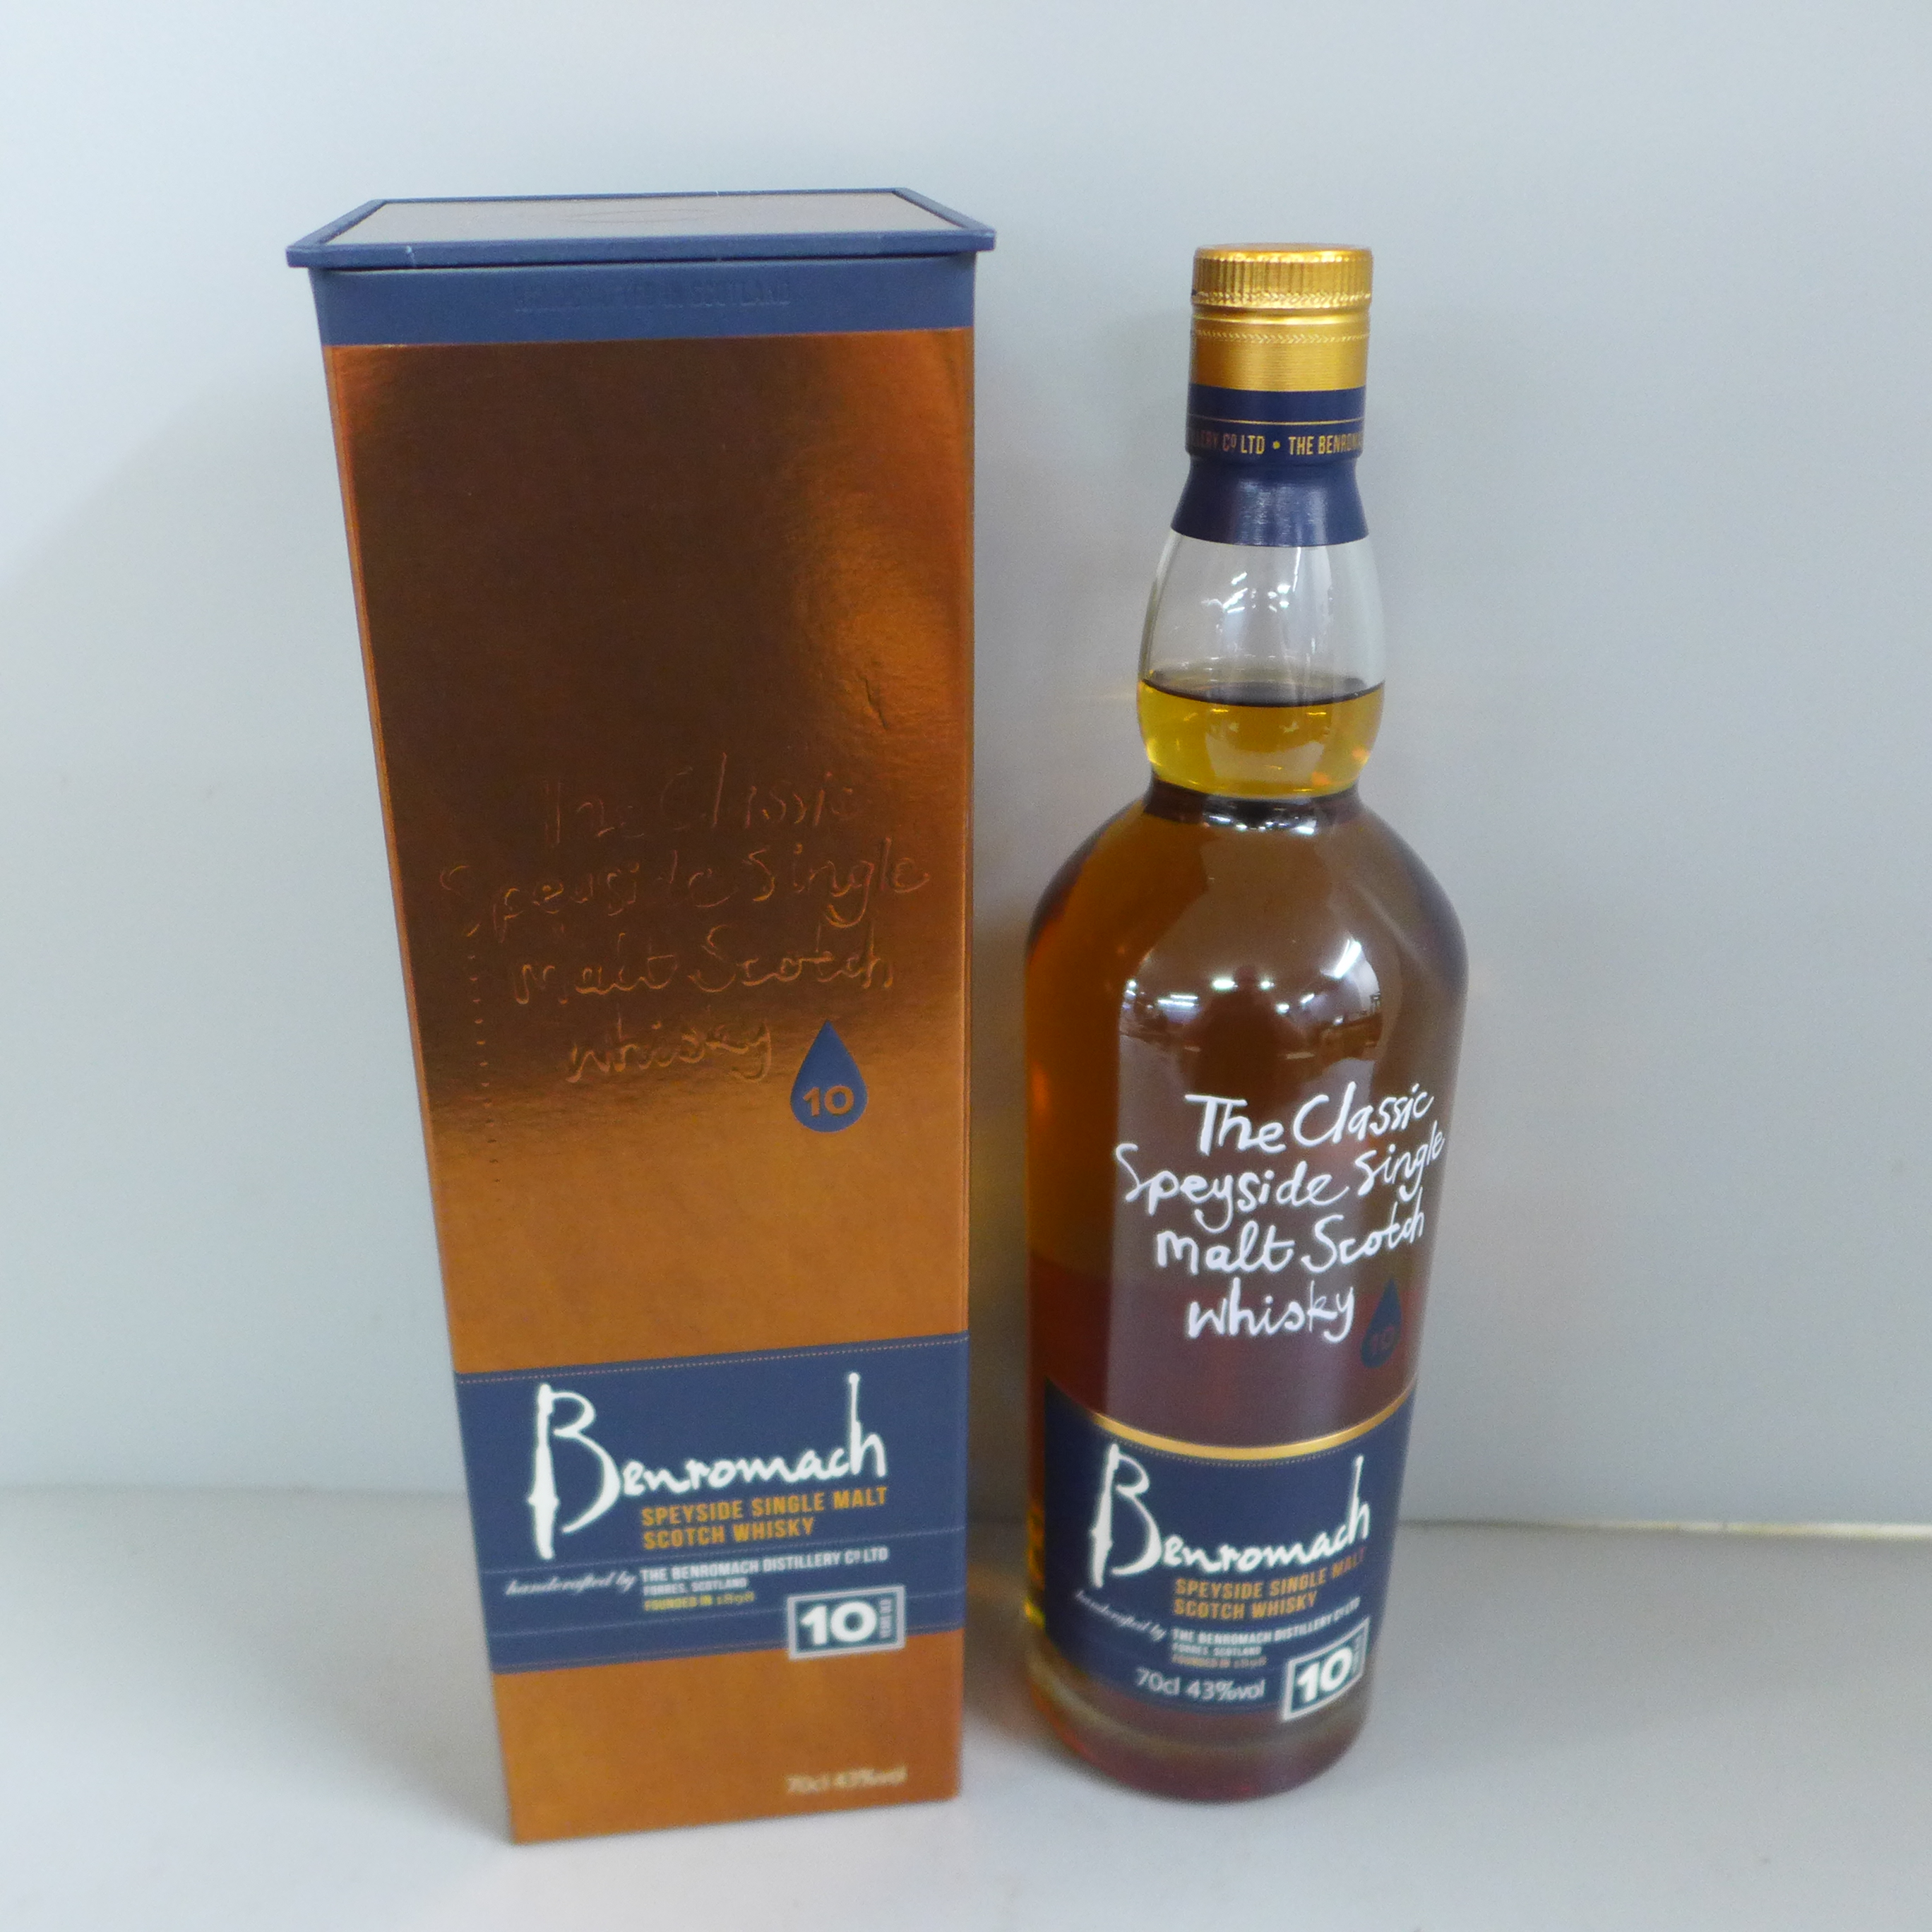 A bottle of Benromach Speyside Single Malt Scotch Whisky, 10 years old, boxed